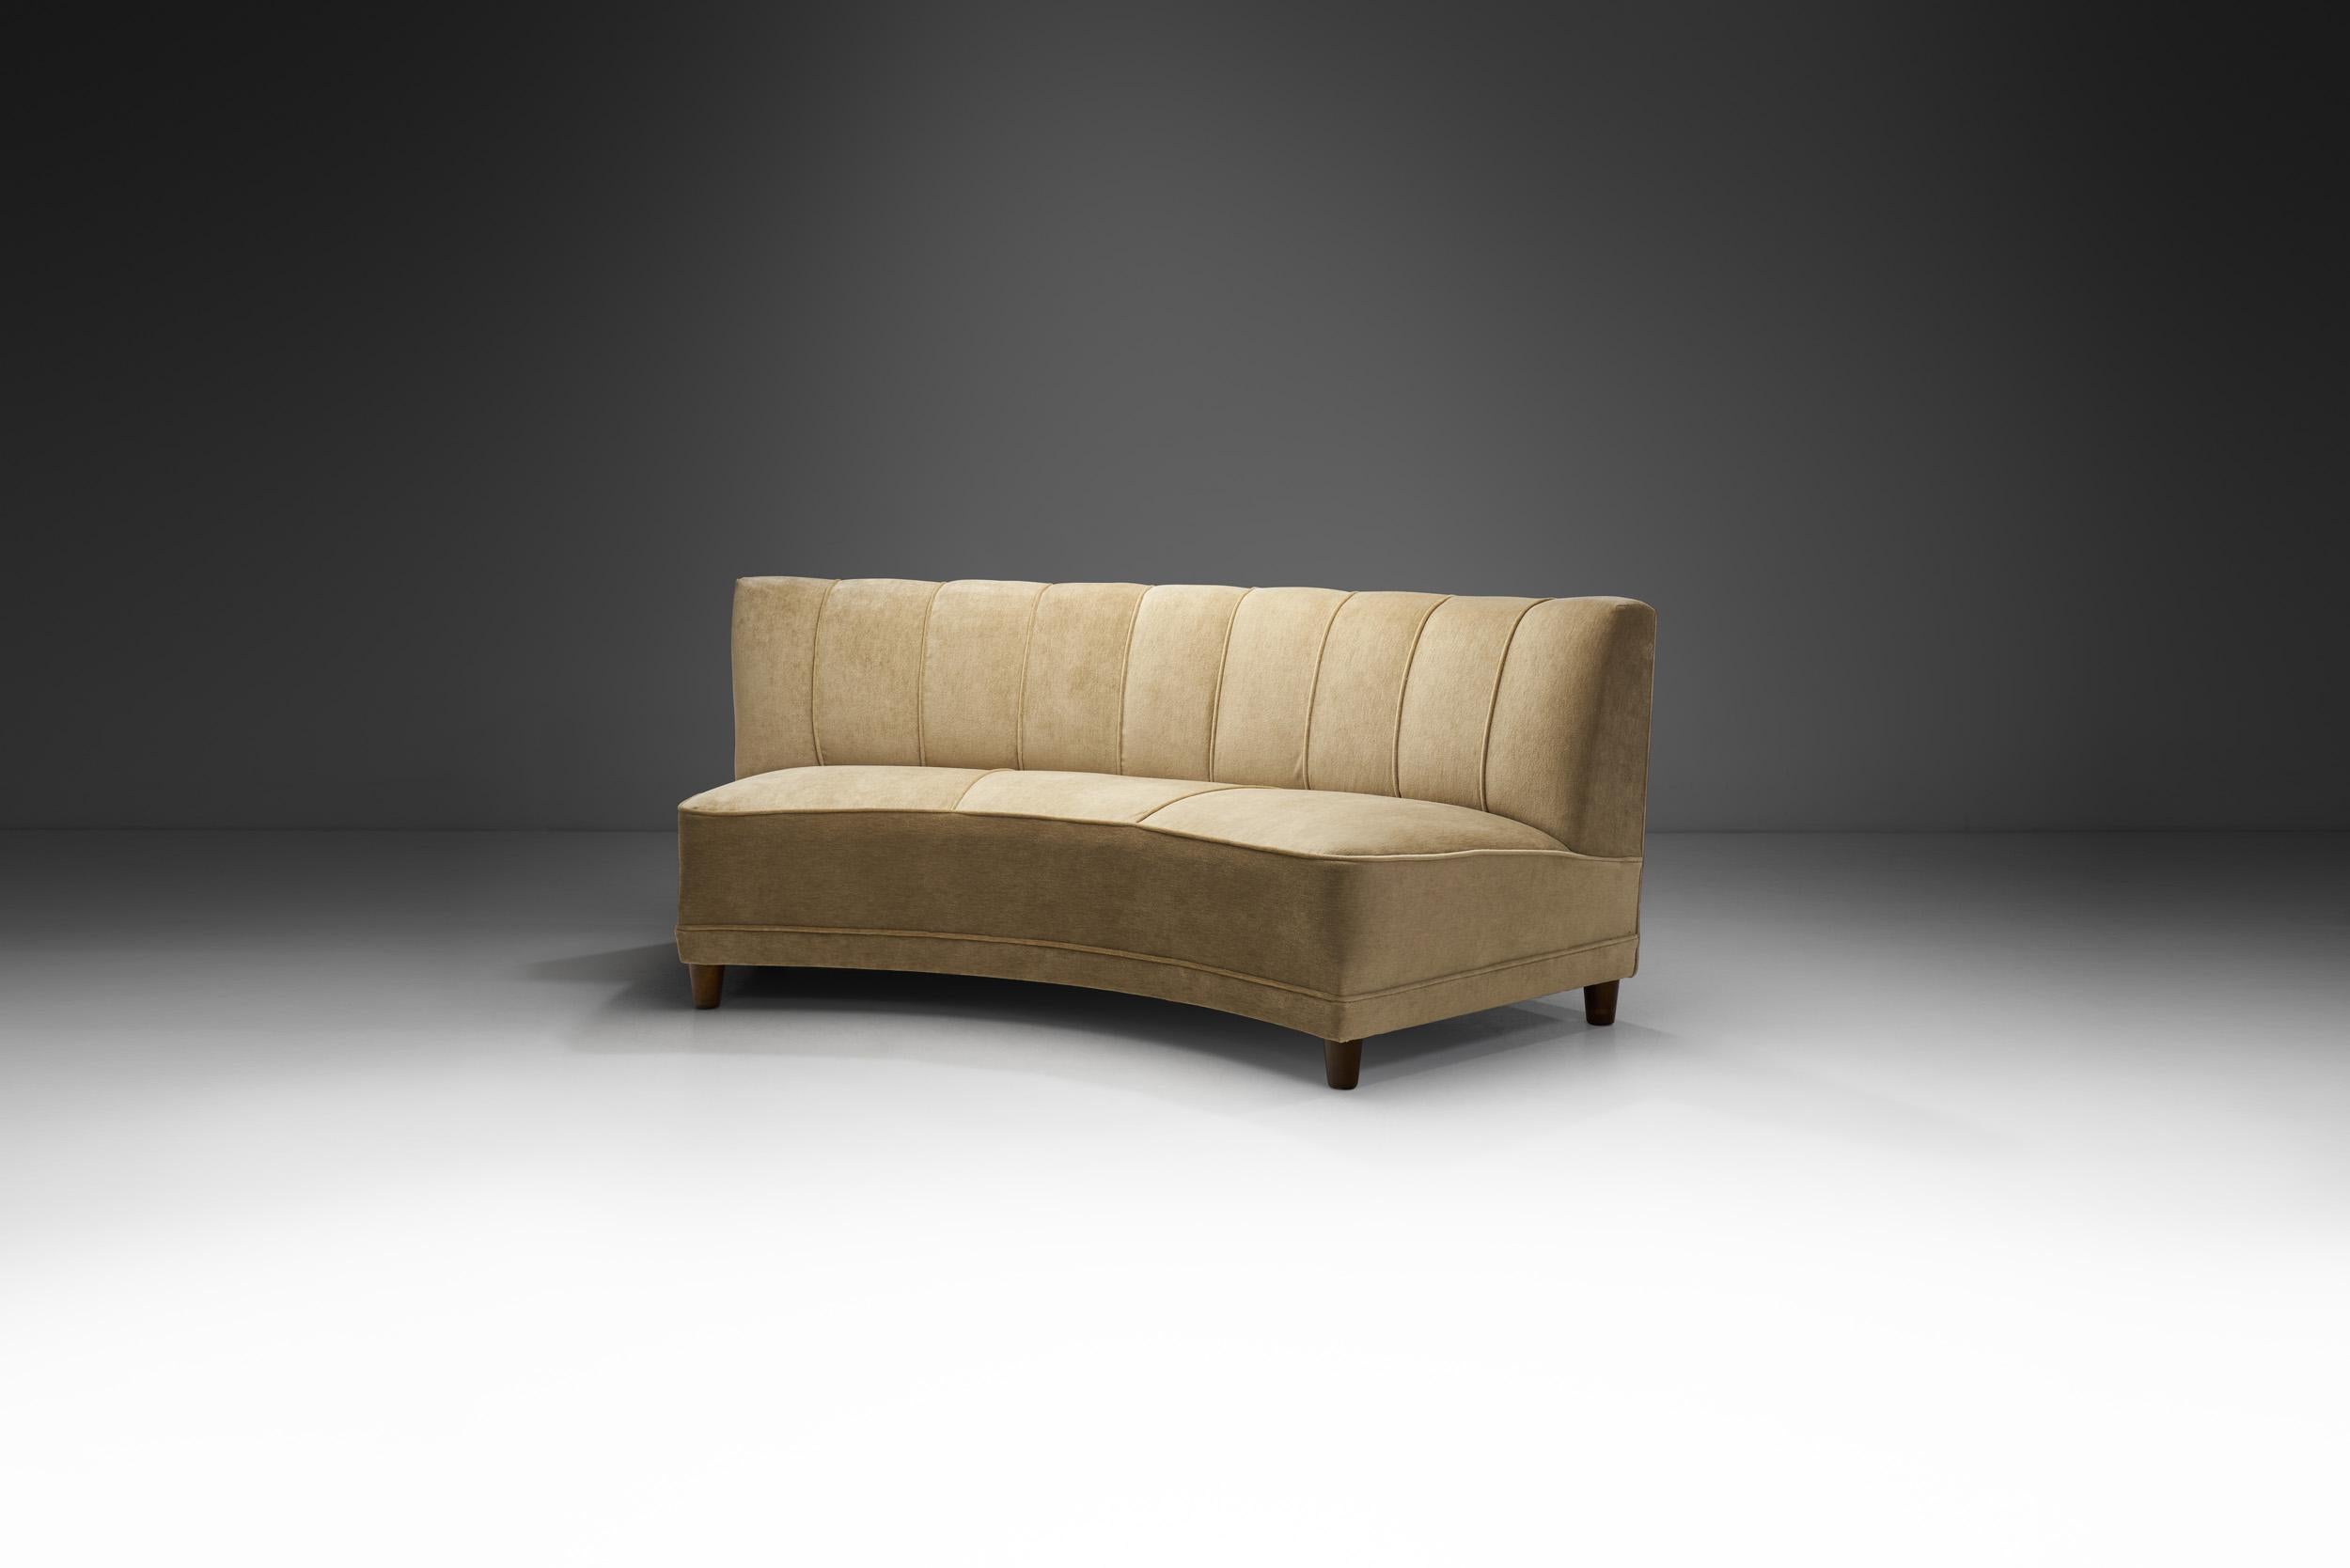 The design of this gorgeous angular sofa recalls the distinctive shapes of the Art Deco period, while also possessing the characteristics of a true Swedish Modern design. Thanks to its distinctive shape, this sofa is exceptionally elegant, a true